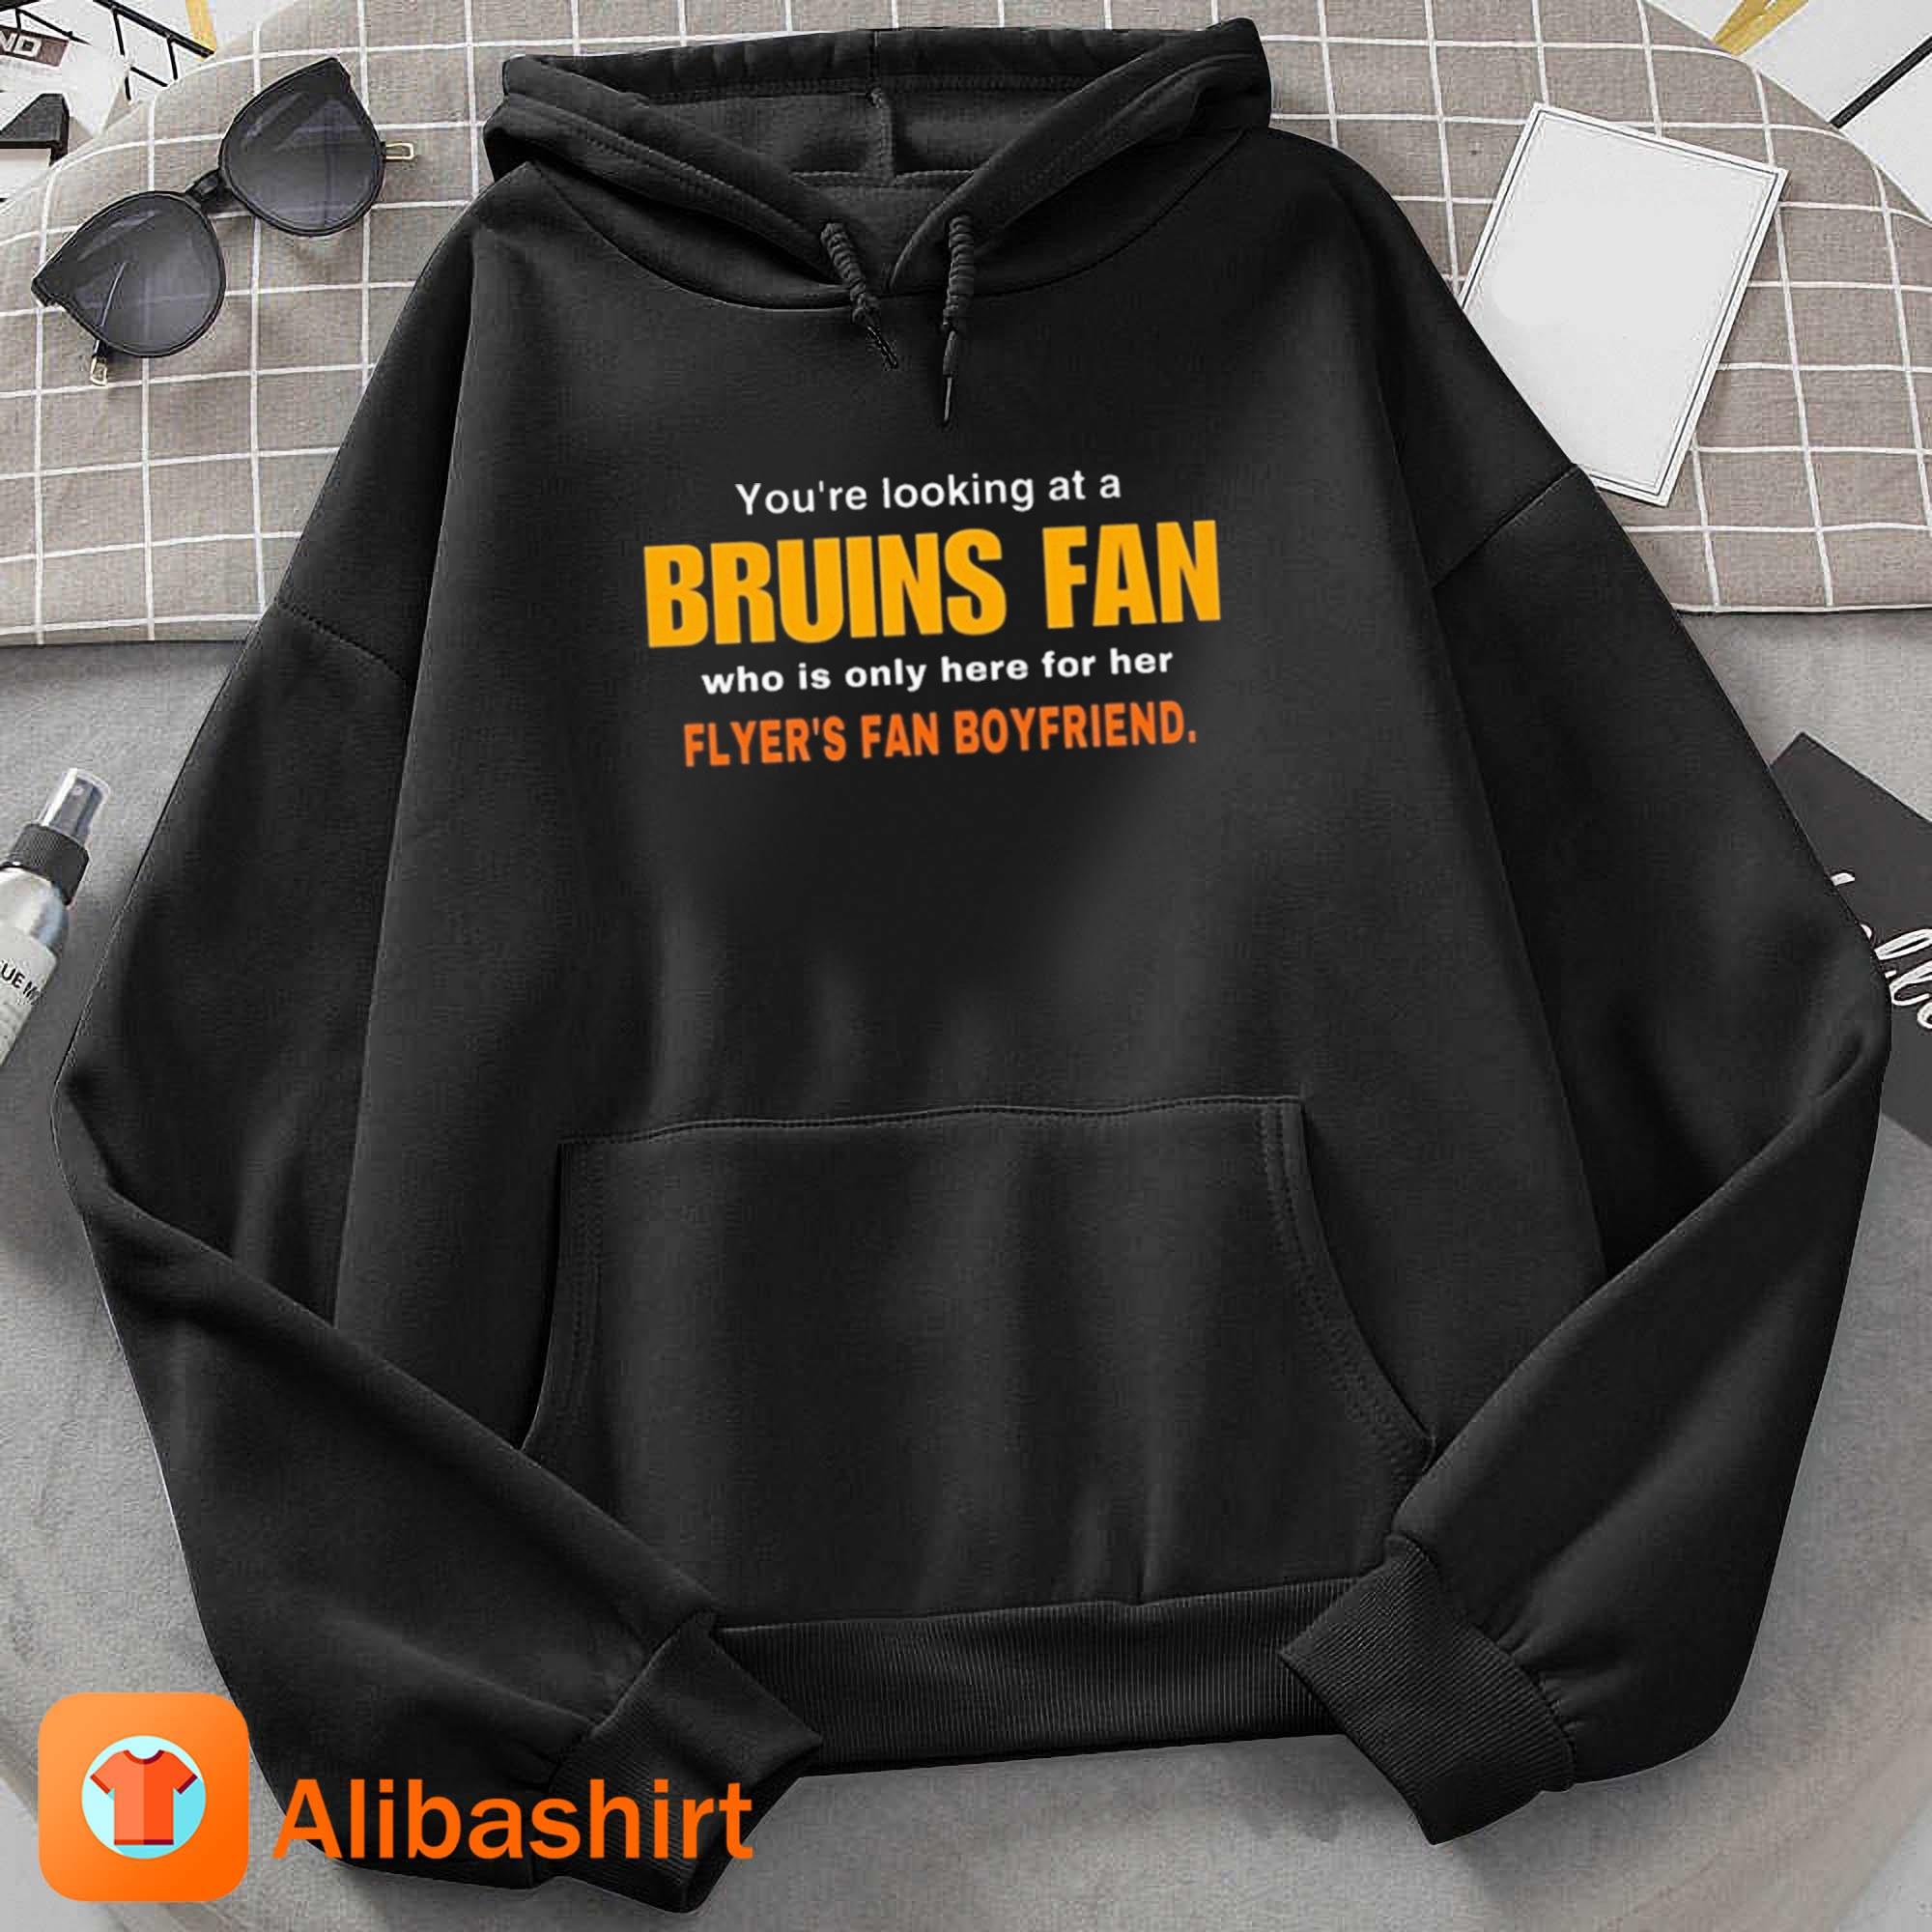 You're Looking At A Bruins Fan Who Is Only Here For Her Flyer's Fan Boyfriend Shirt Hoodie